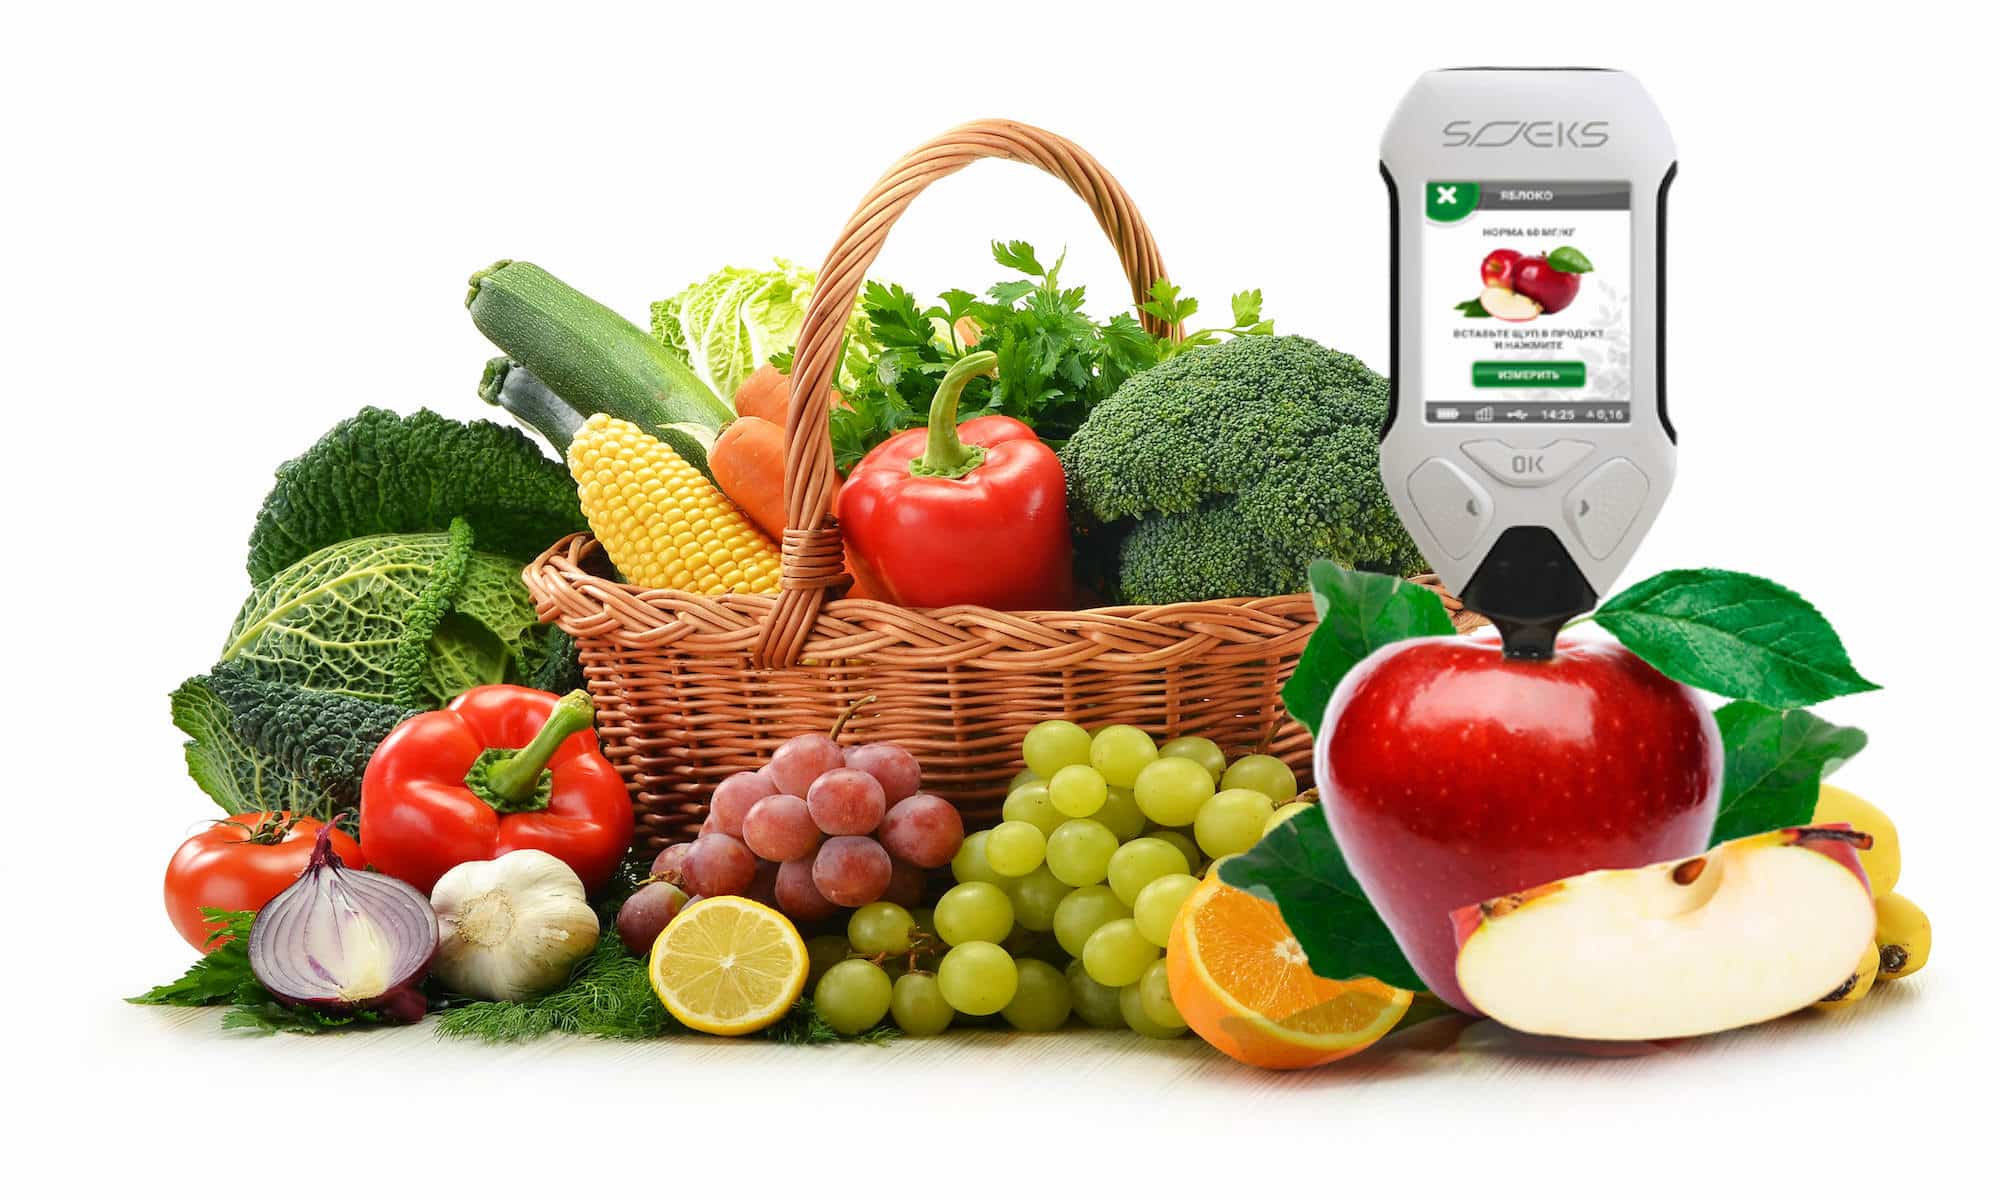 EcoVisor F4 will: Measure nitrate levels in vegetables and fruits (Nitrate Tester); Measure the level of radiation background (Dosimeter); Search for zones with increased Electromagnetic Radiation (EMF meter); Determine the quality of Water (TDS meter).